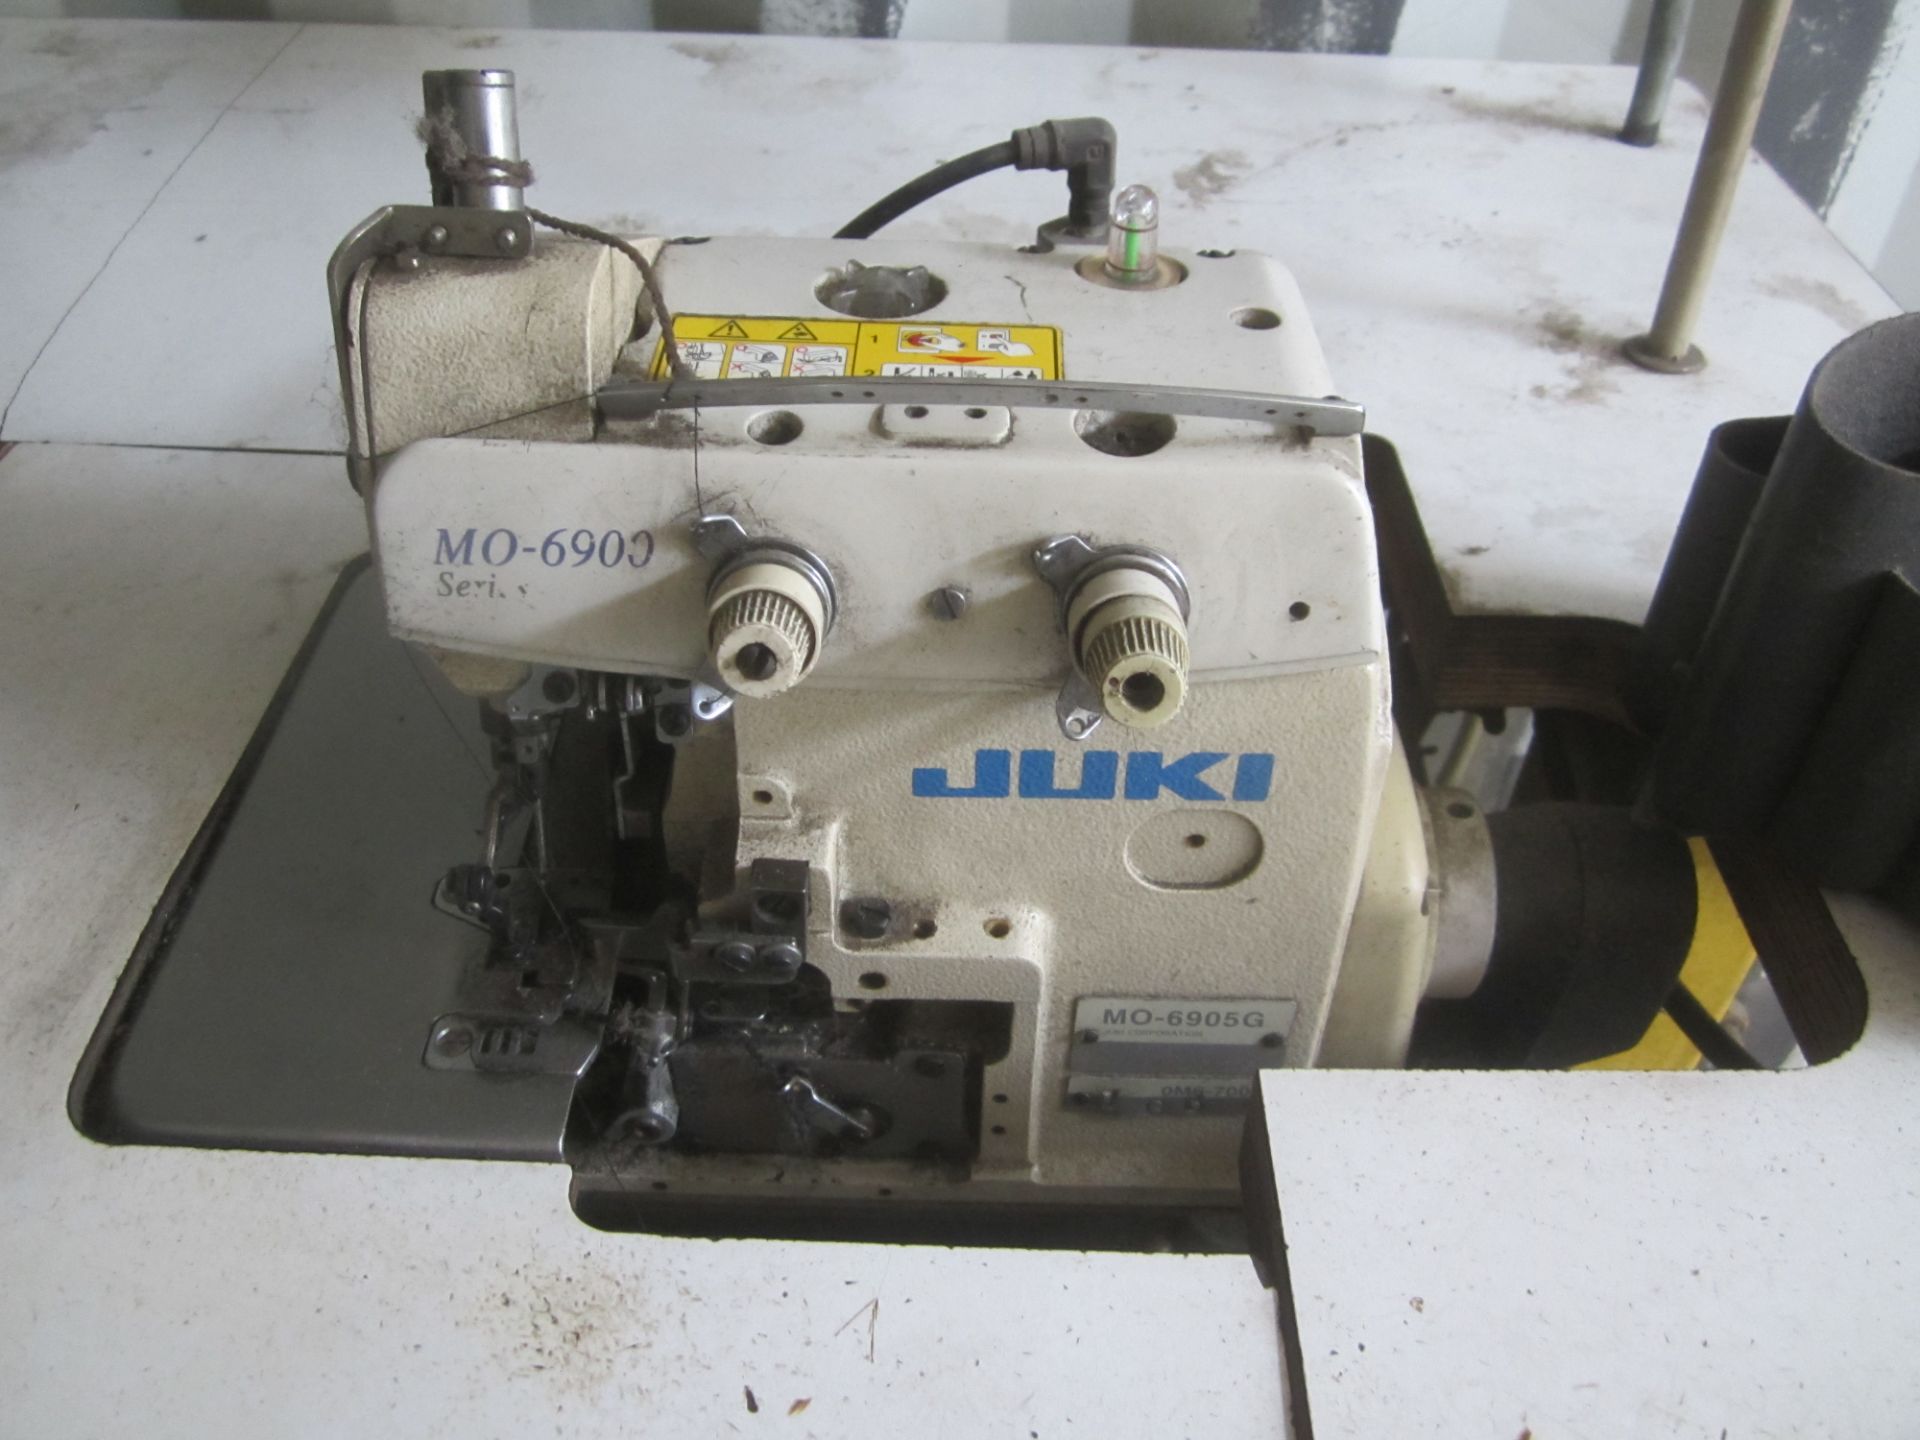 Juki Model MO-6905G Class OM6-700 Industrial Sewing Machine, s/n 8MOEJ31236, with Table and Foot - Image 2 of 6